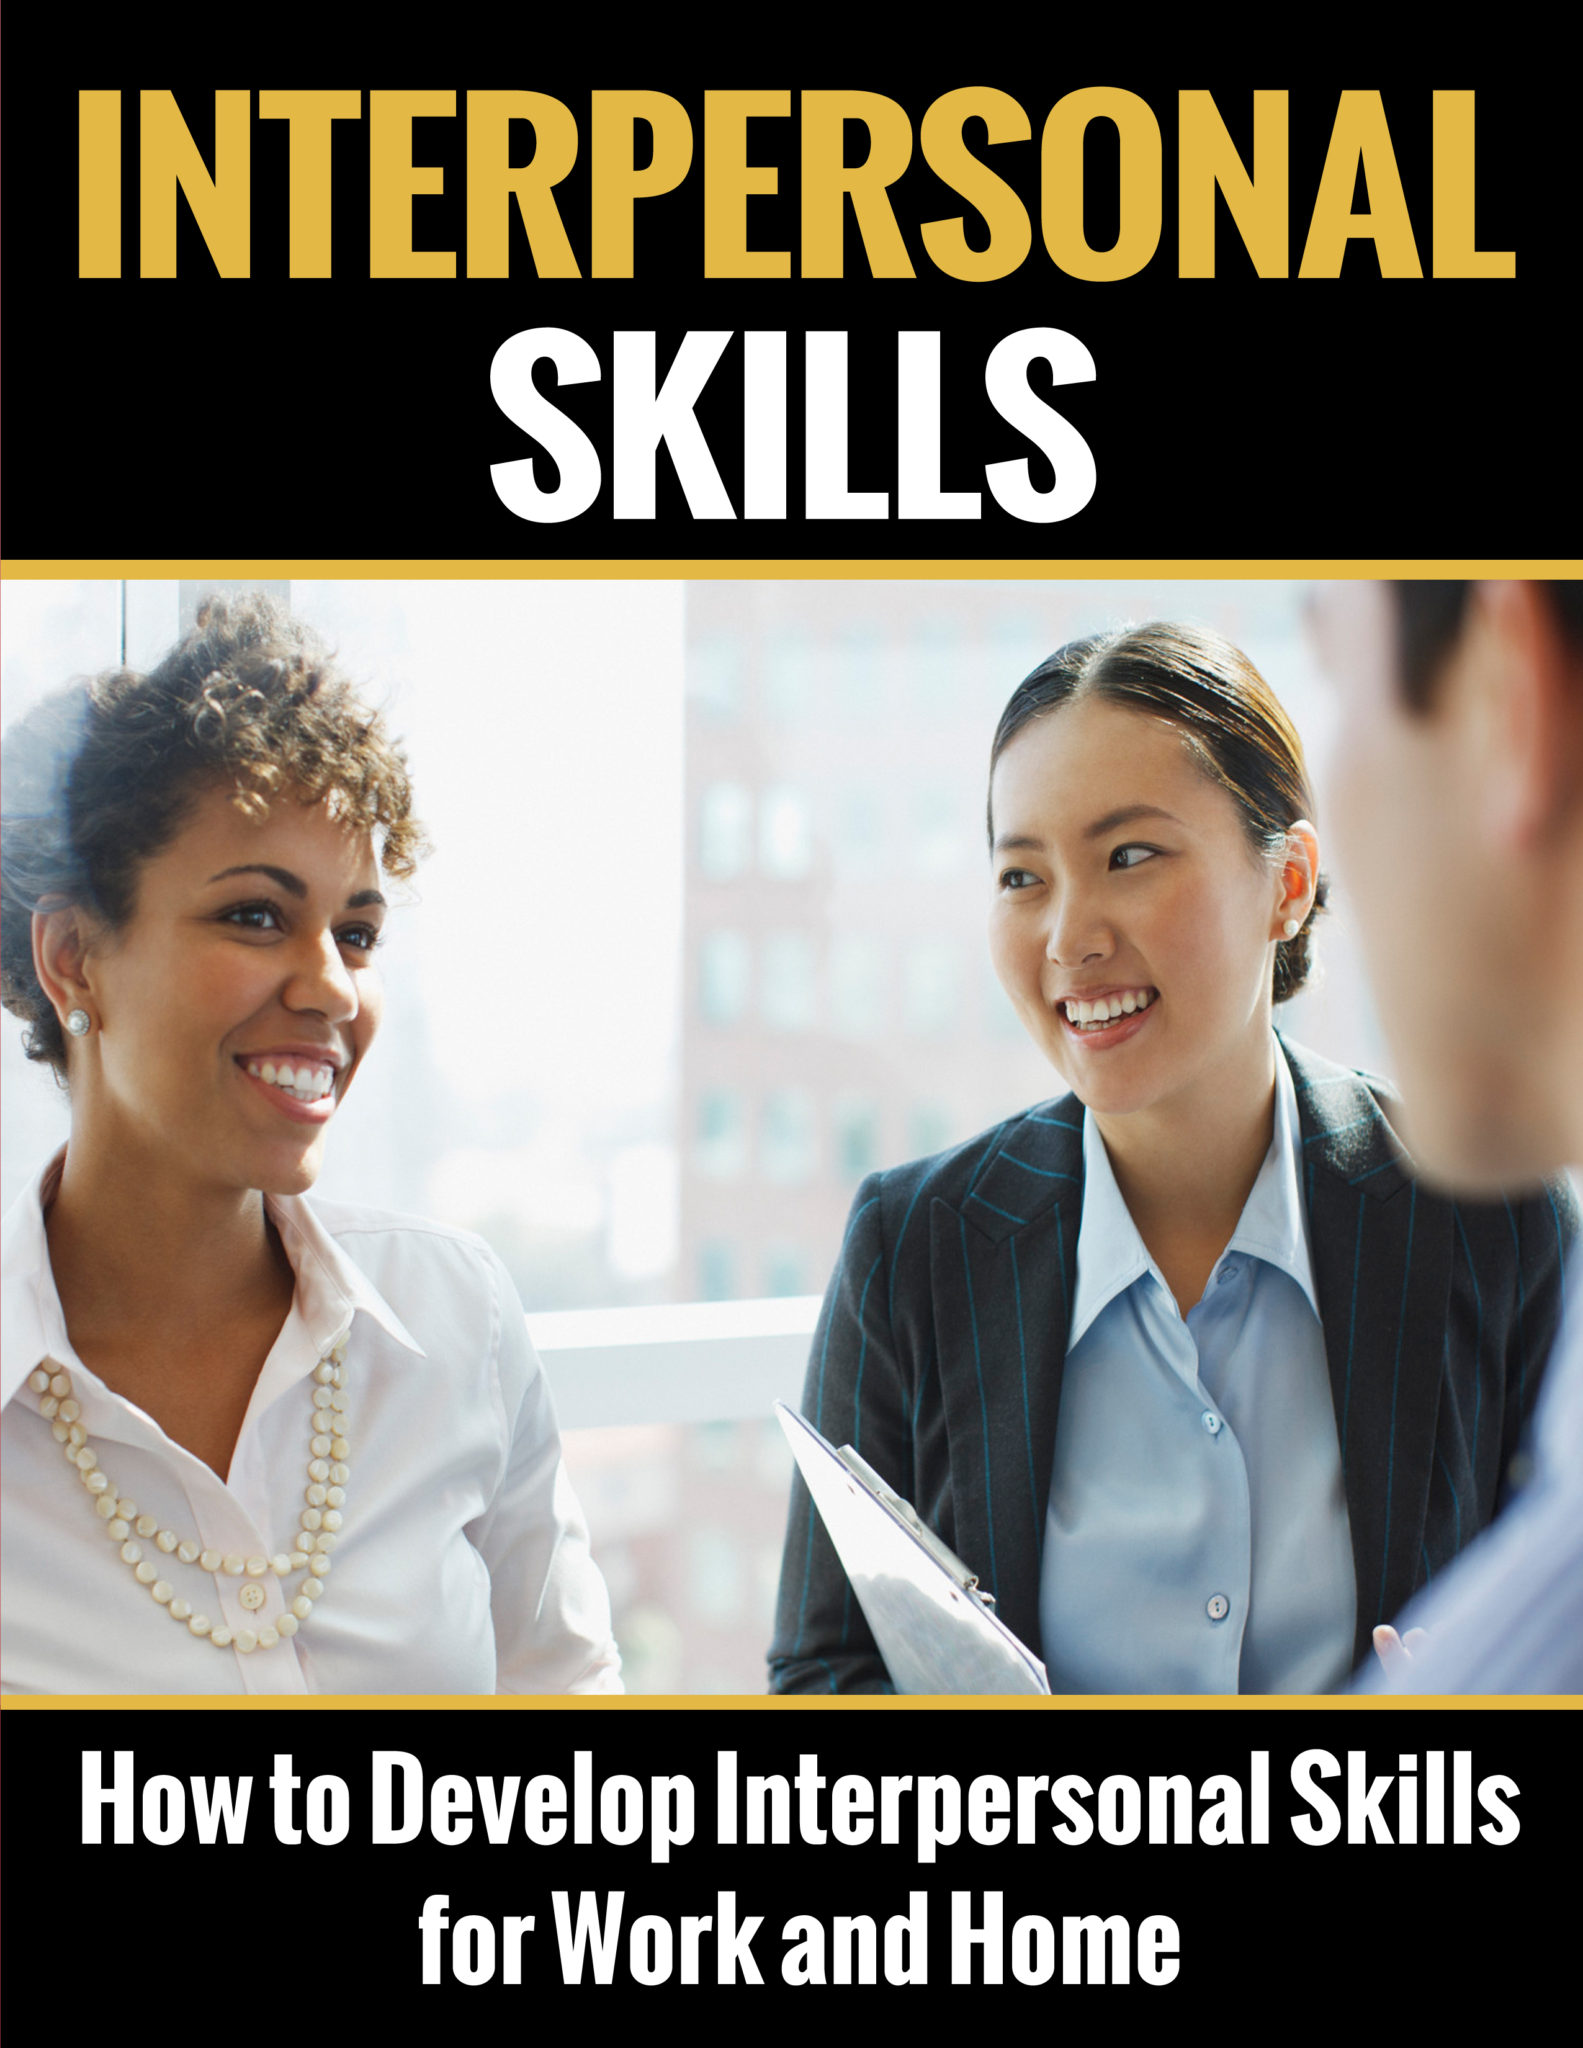 FREE: Interpersonal Skills: How to Develop Interpersonal Skills for Work and Home by Henry Lee